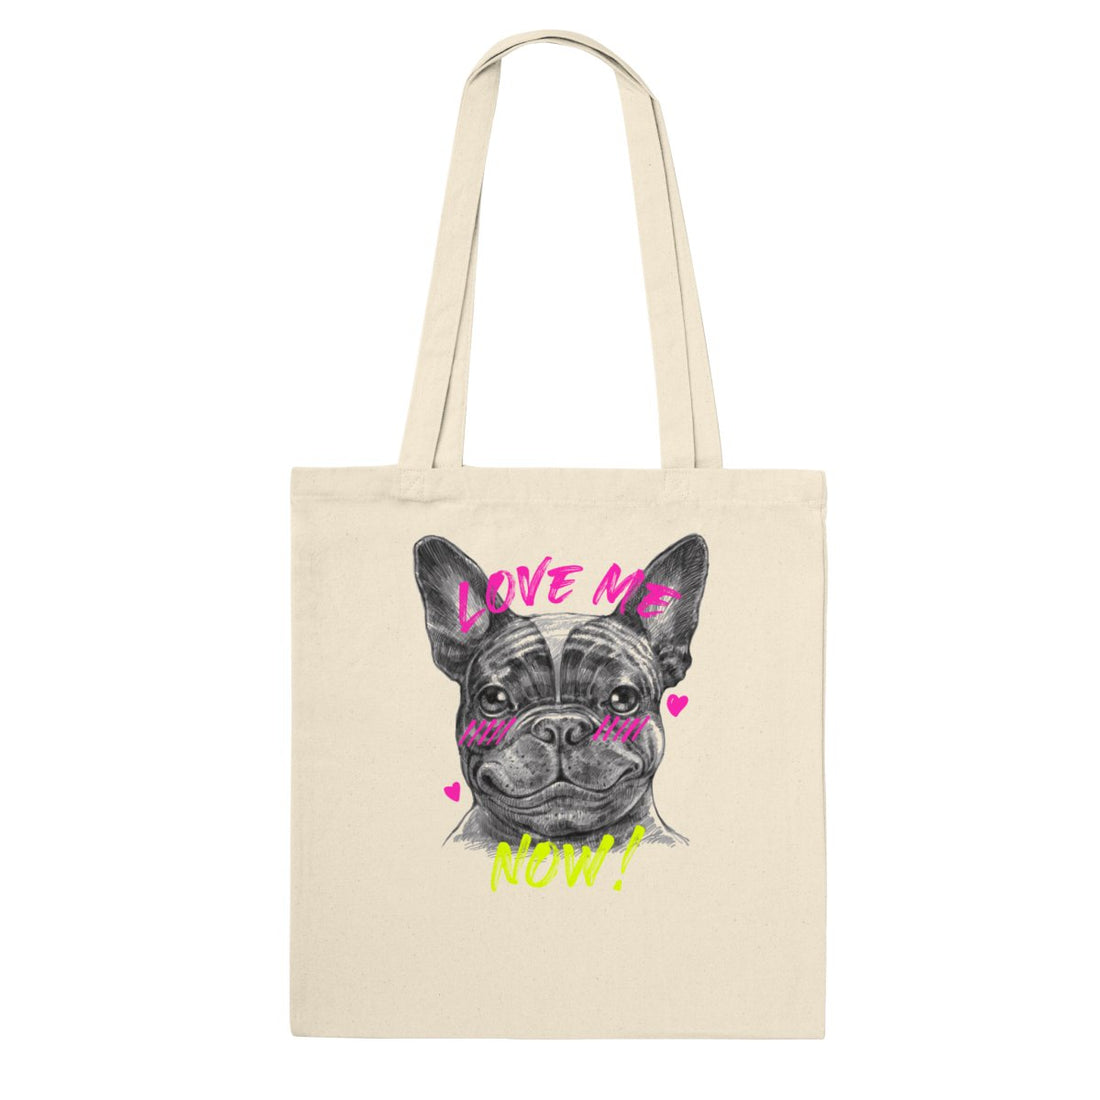 Frenchie Classic Tote bag - TINT - Print Material - TINT - 0c708931-0af6-41ab-ade2-260ceed36139